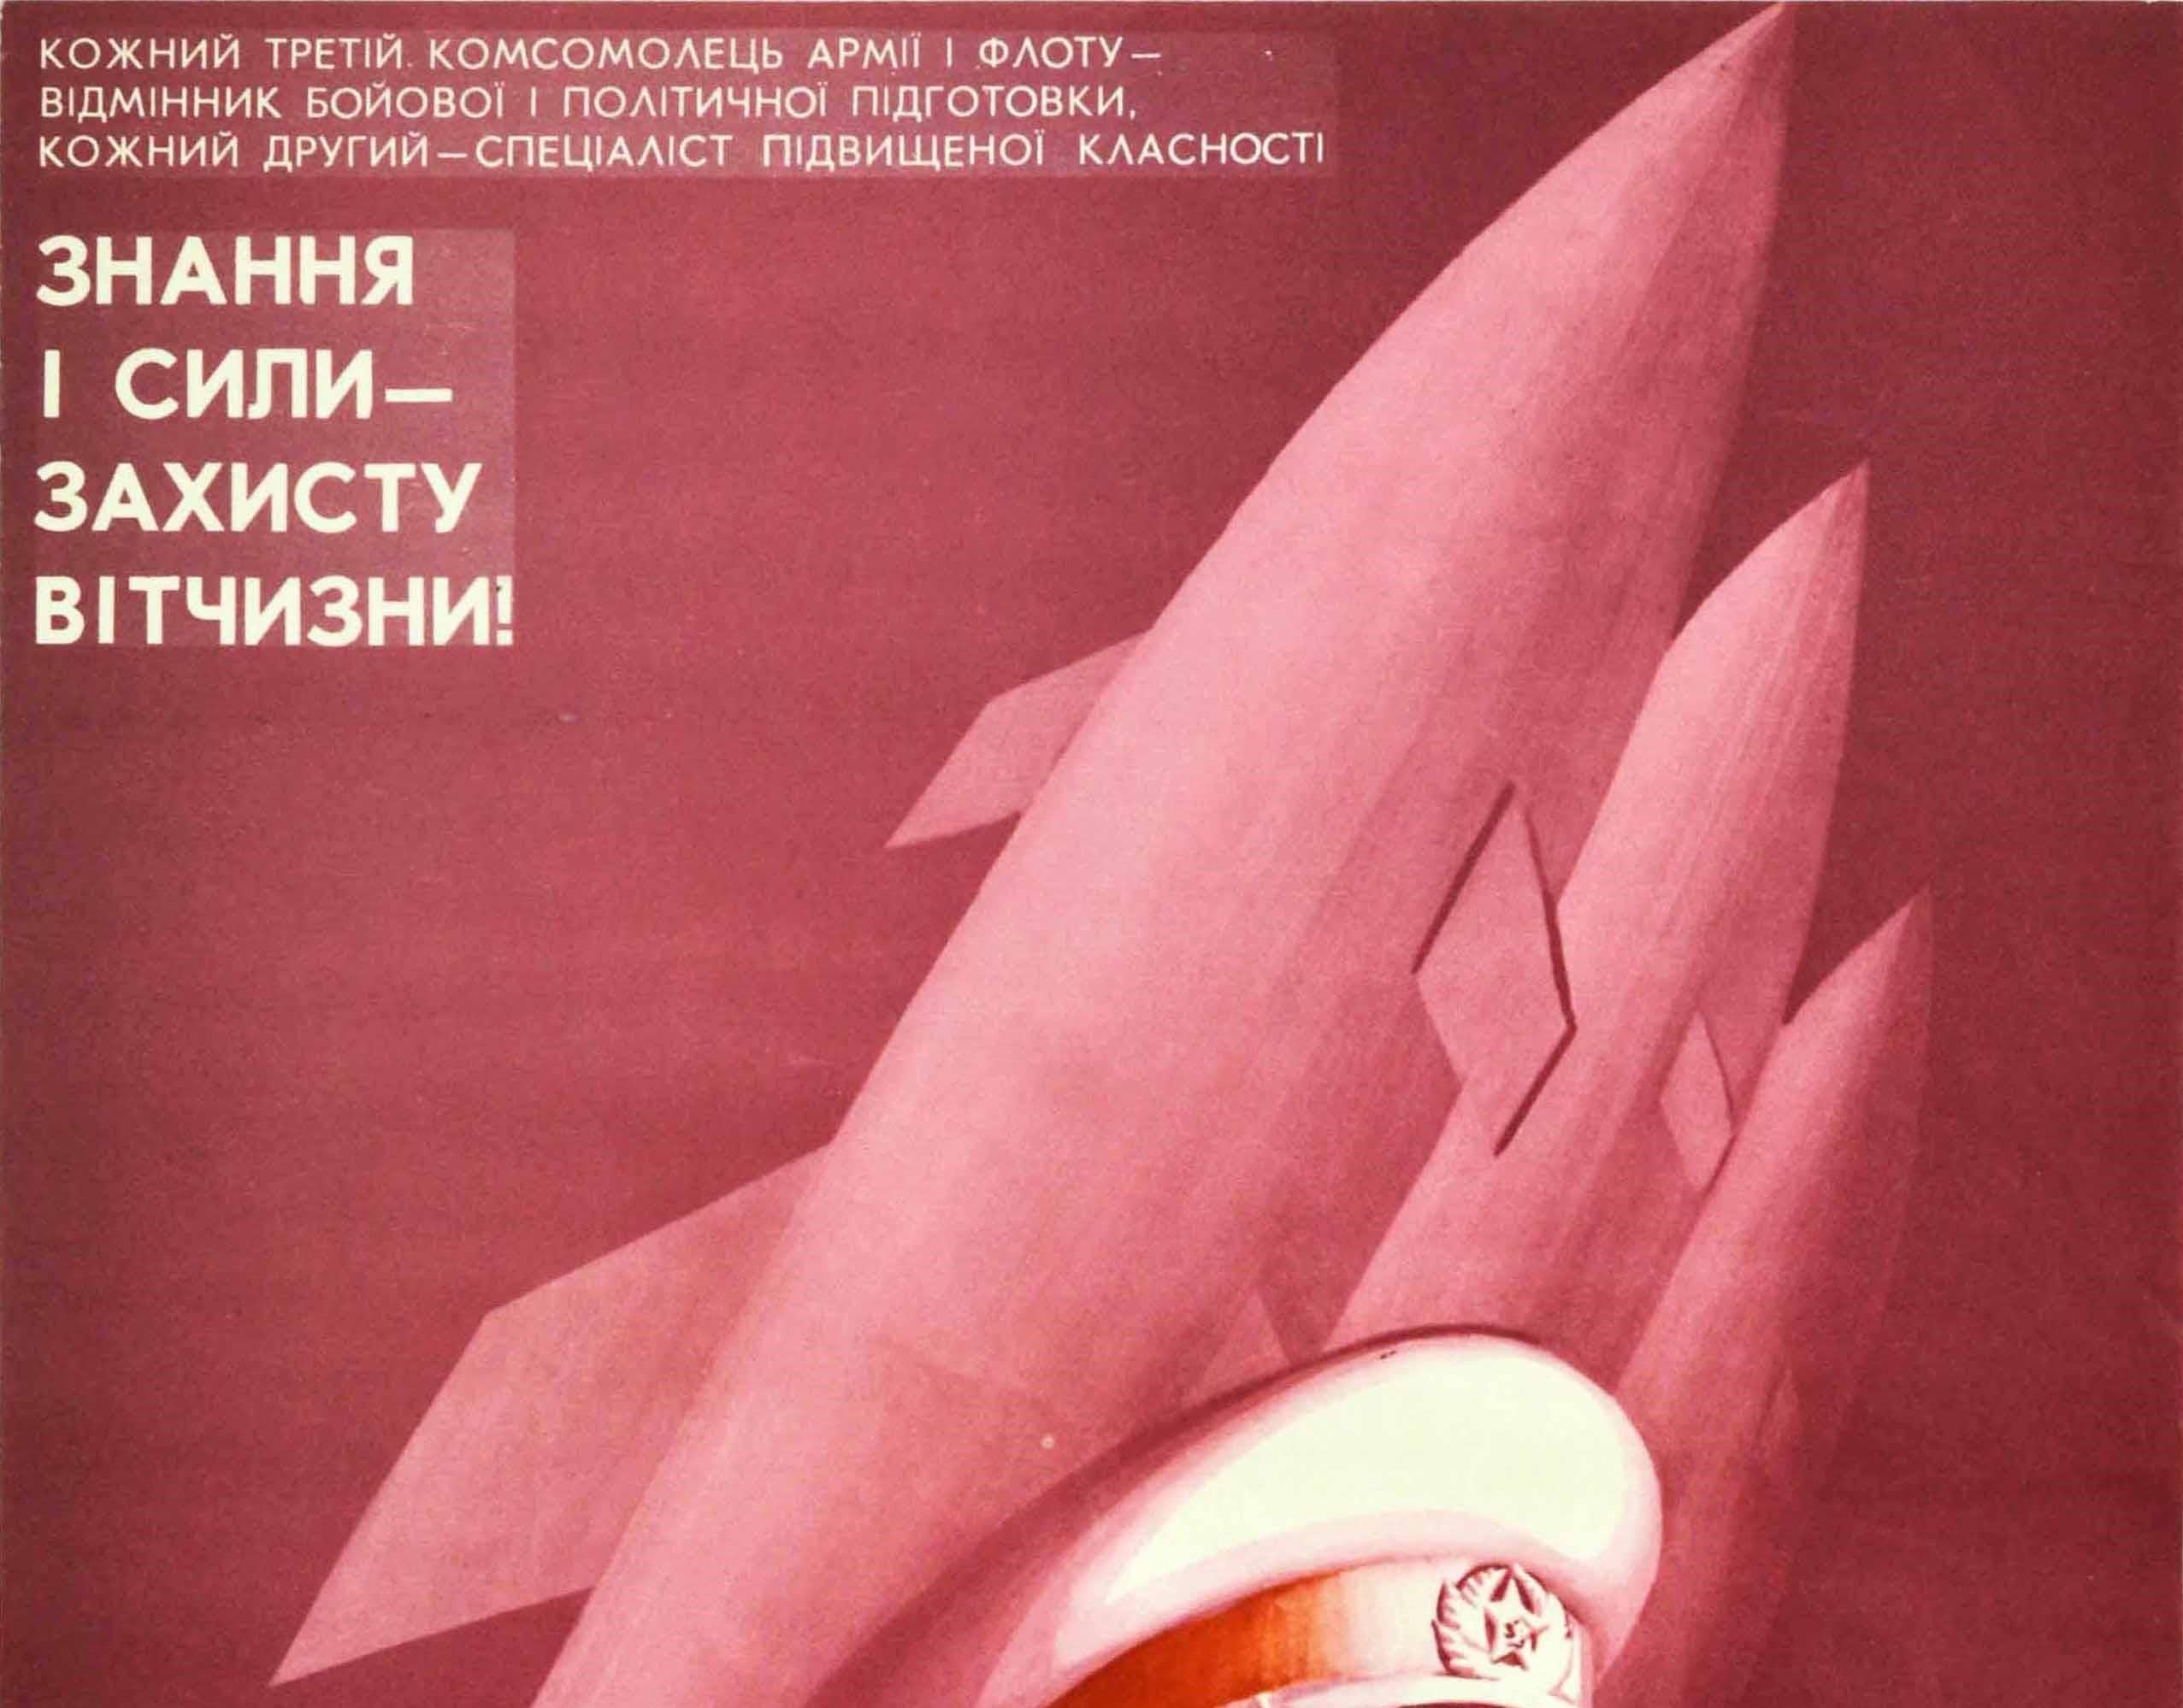 Original vintage Soviet propaganda poster featuring a great image of a ????????? ????? ?? / Soviet Army soldier in uniform with a rifle gun over his shoulder, standing in front of a row of missile rockets with the text in white above in Ukrainian -